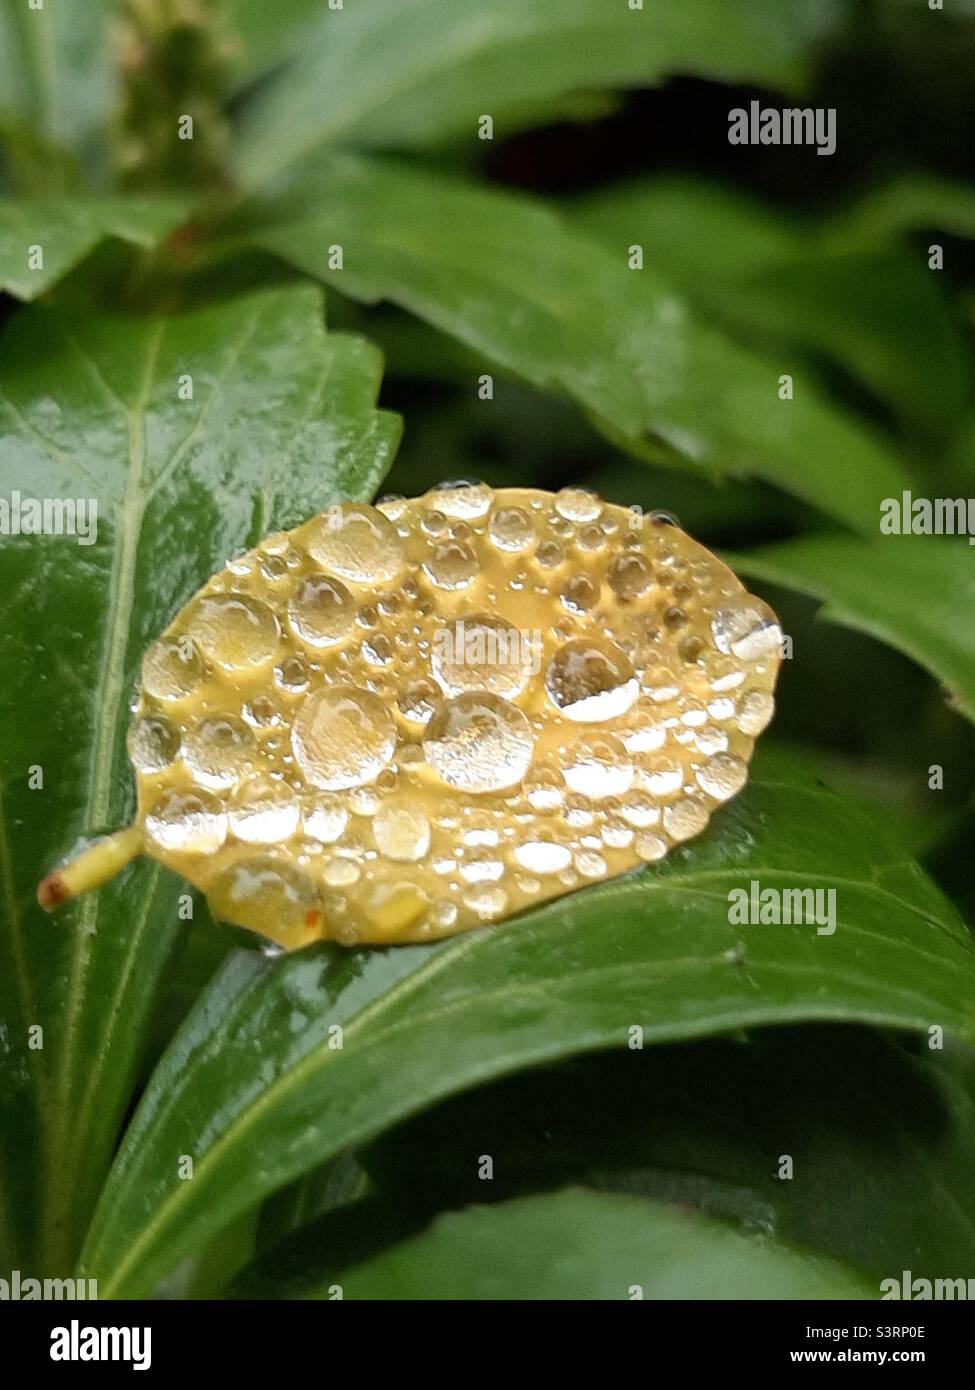 Water drops on a leaf Stock Photo